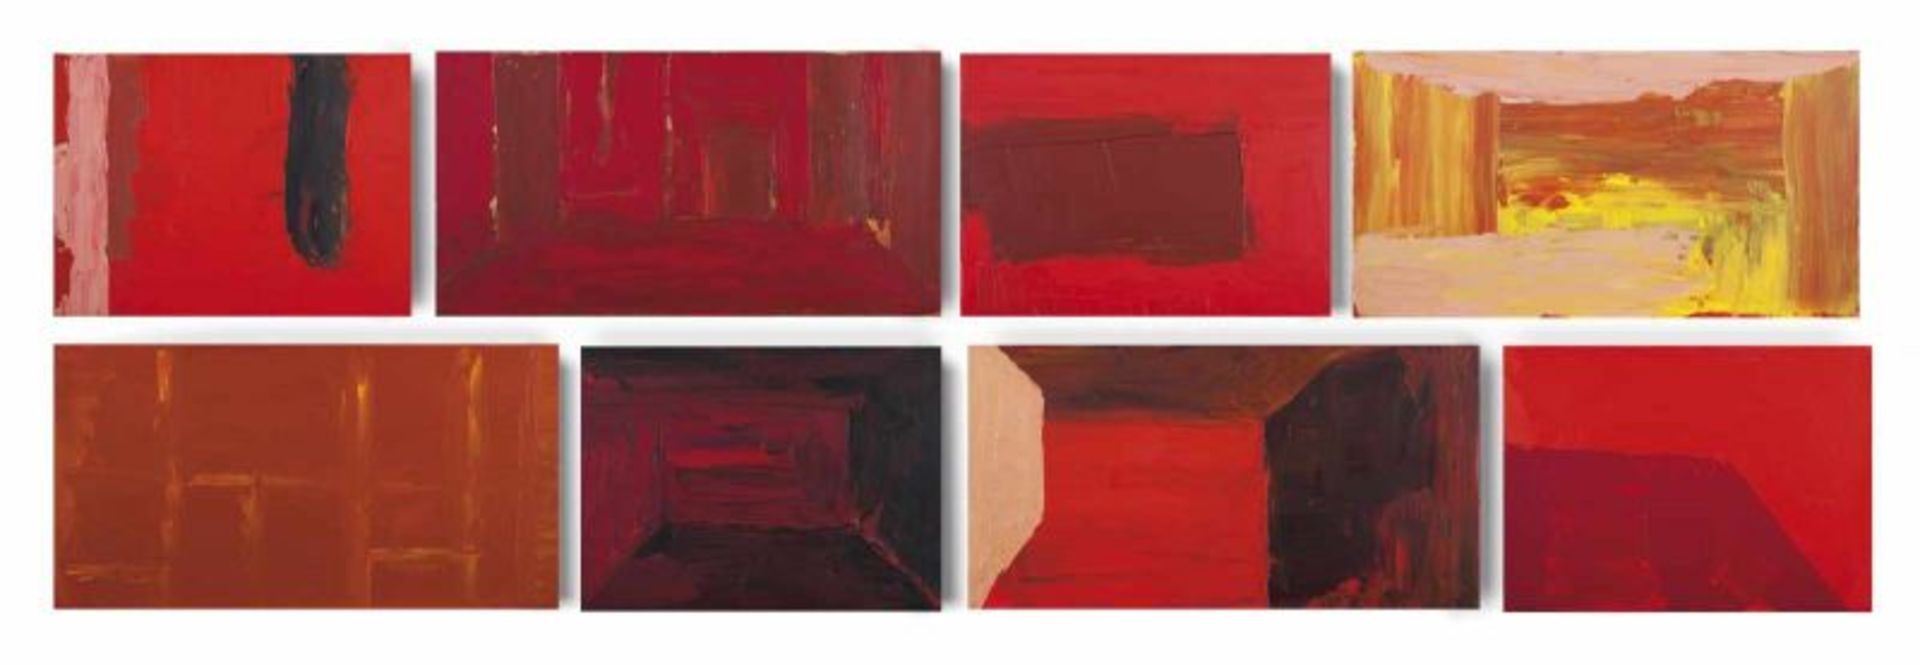 Pedro Calapez (n. 1953)"Cena 12"Polyptych (8 pieces)Alkyd on MDFSigned and dated 98 on the reverse